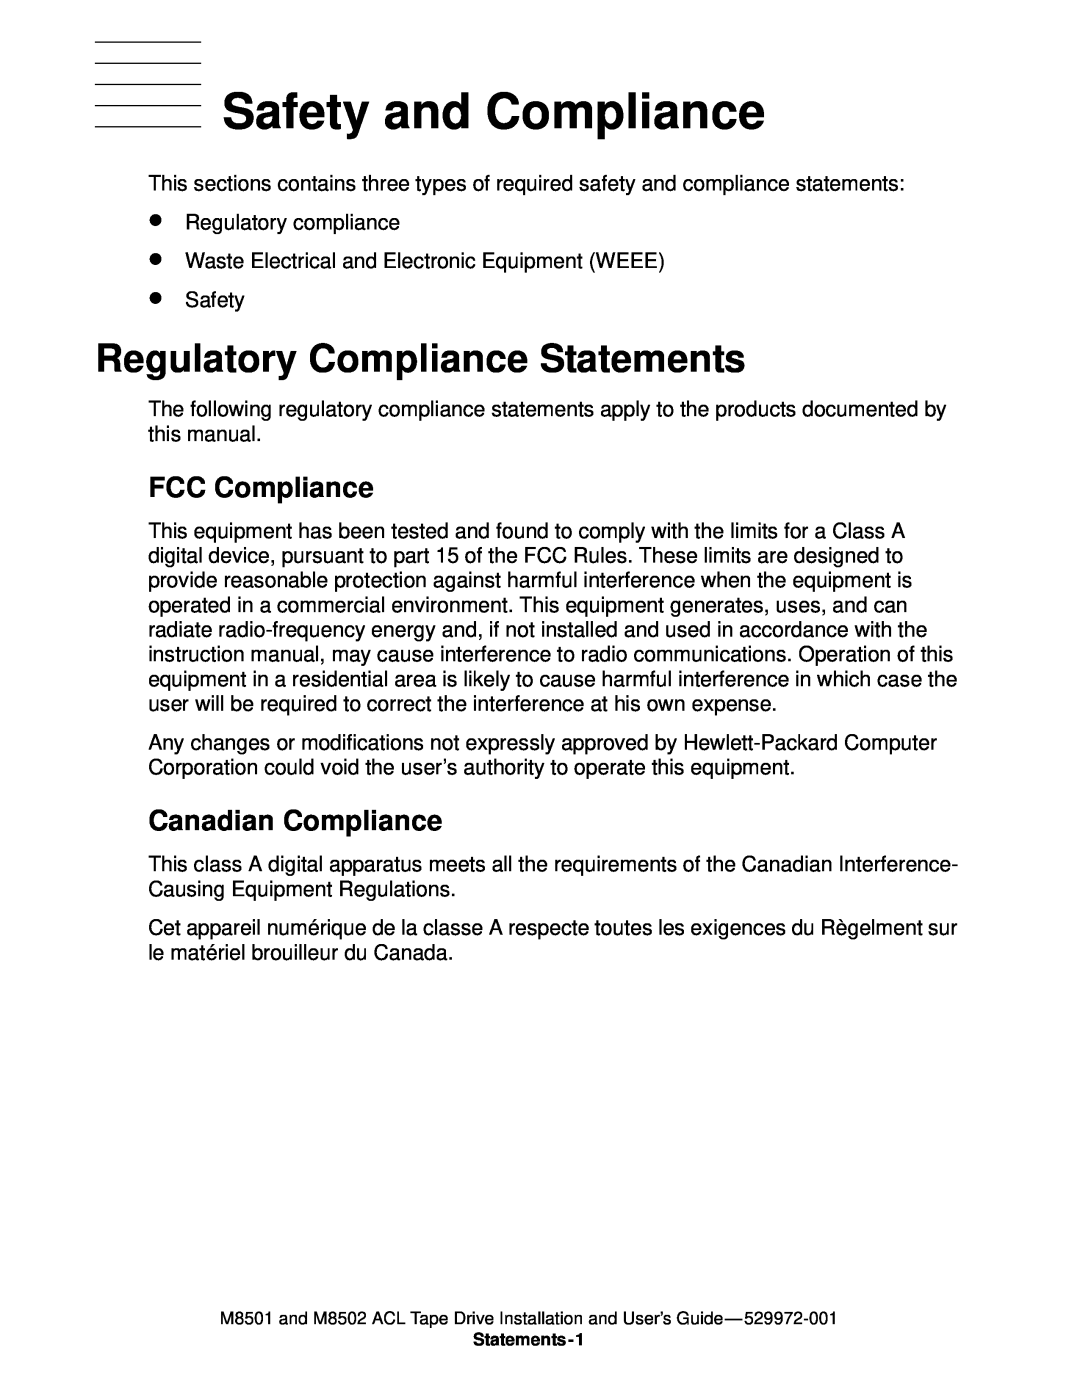 SMC Networks M8501 manual Safety and Compliance, Regulatory Compliance Statements, FCC Compliance, Canadian Compliance 